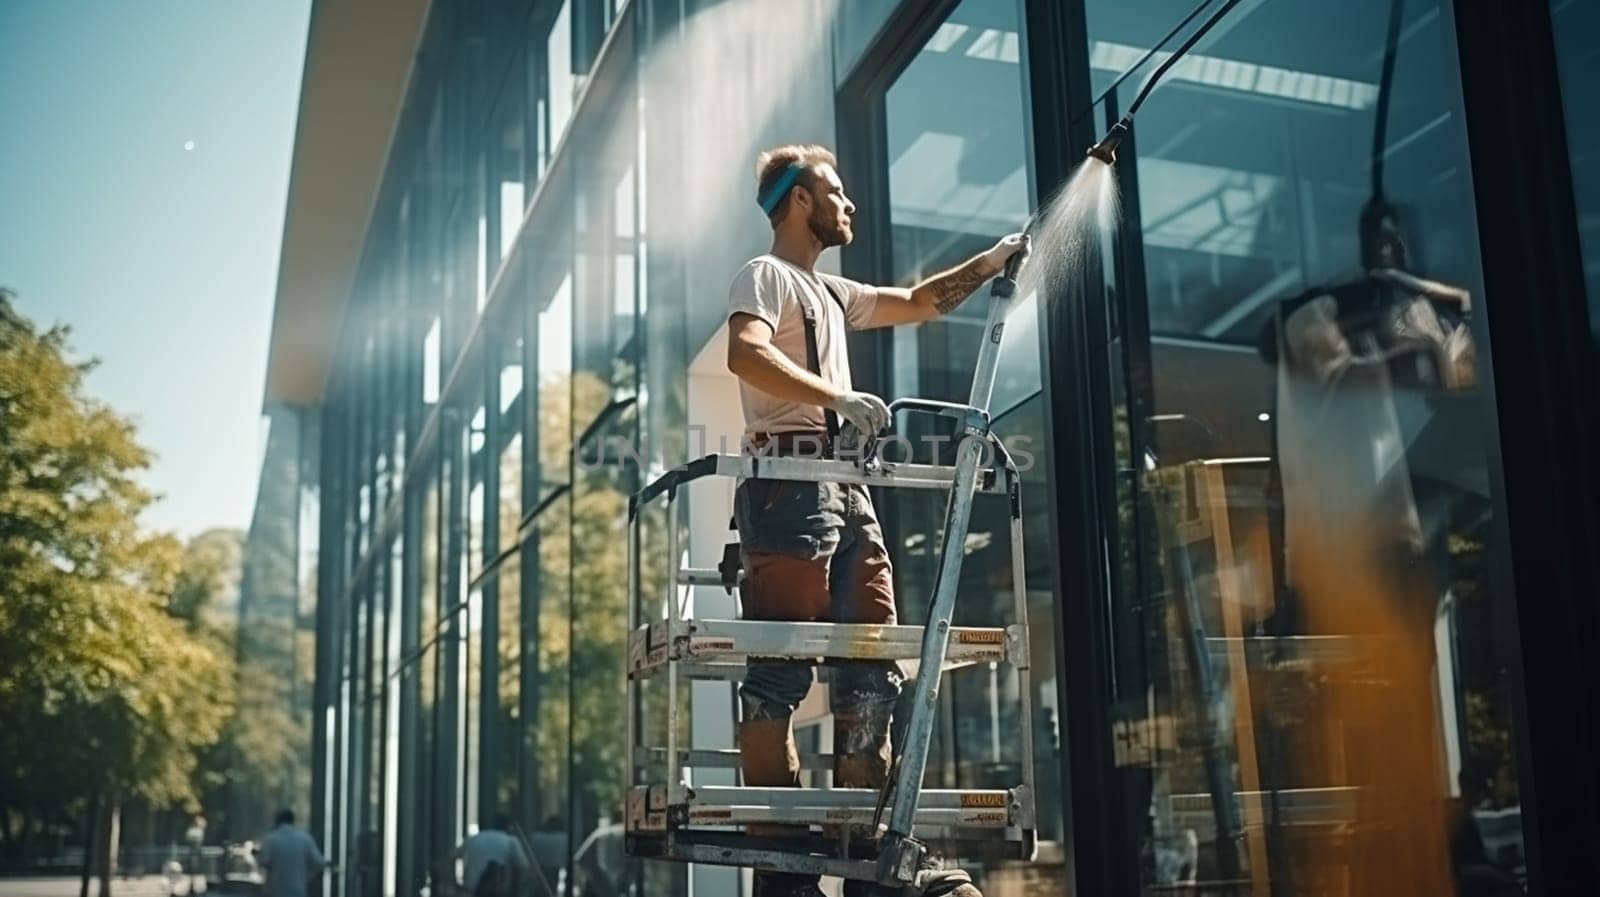 Window washing on a high-rise building using a hydraulic tower. High quality photo